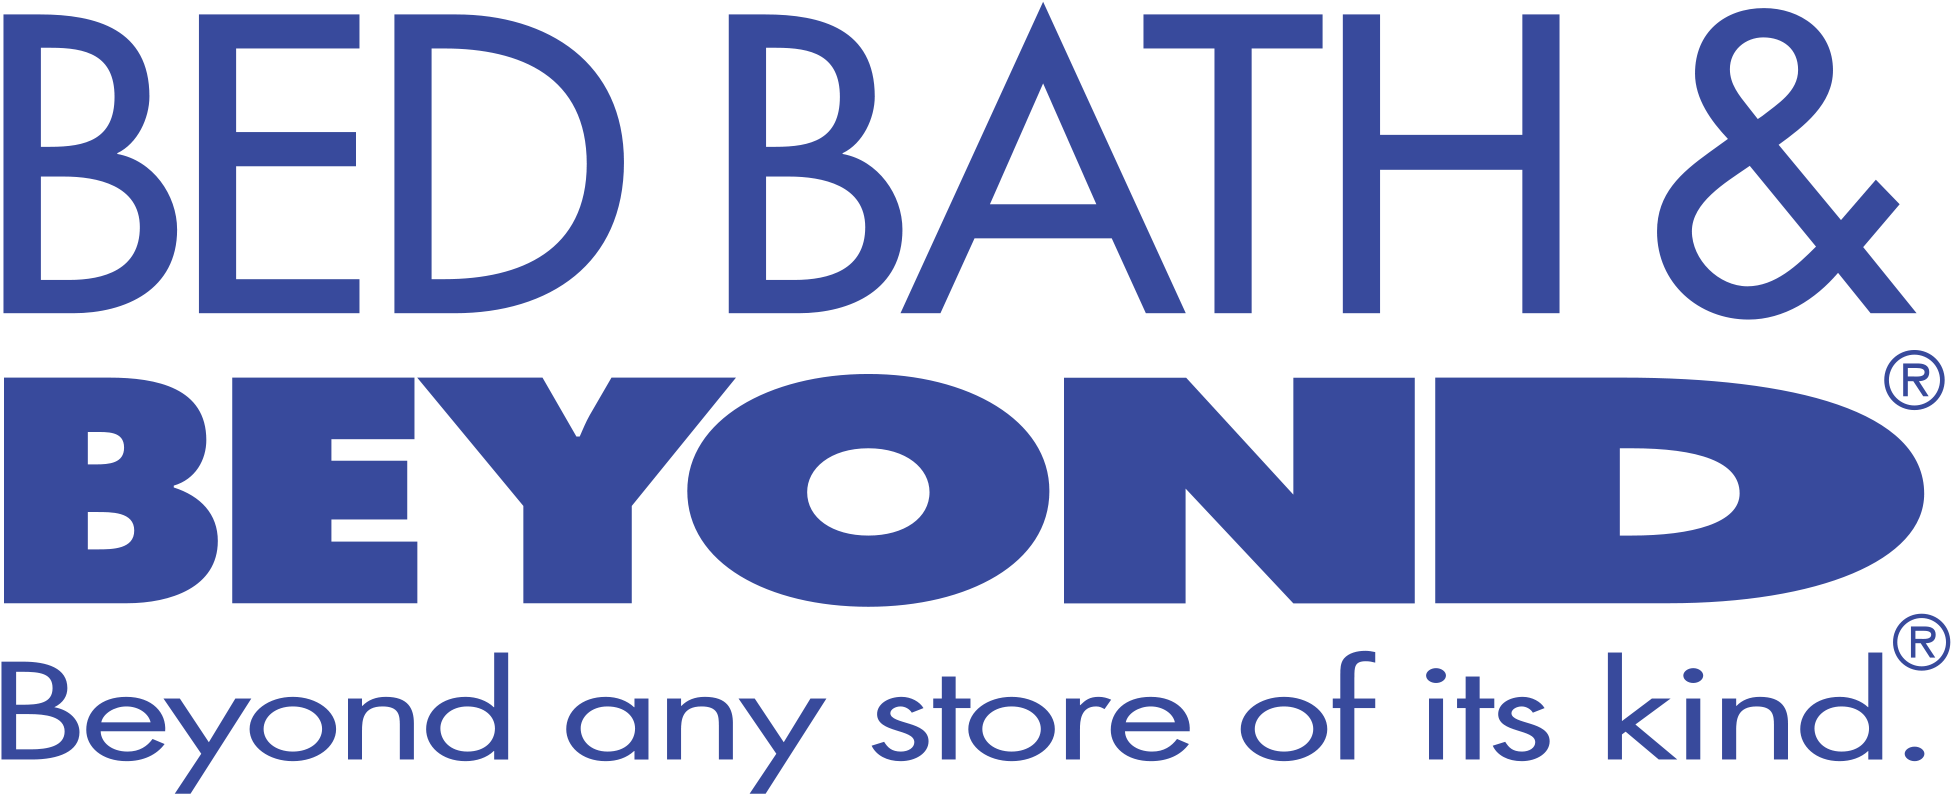 Bbb-logo - Bed Bath And Beyond Slogan (2000x833), Png Download